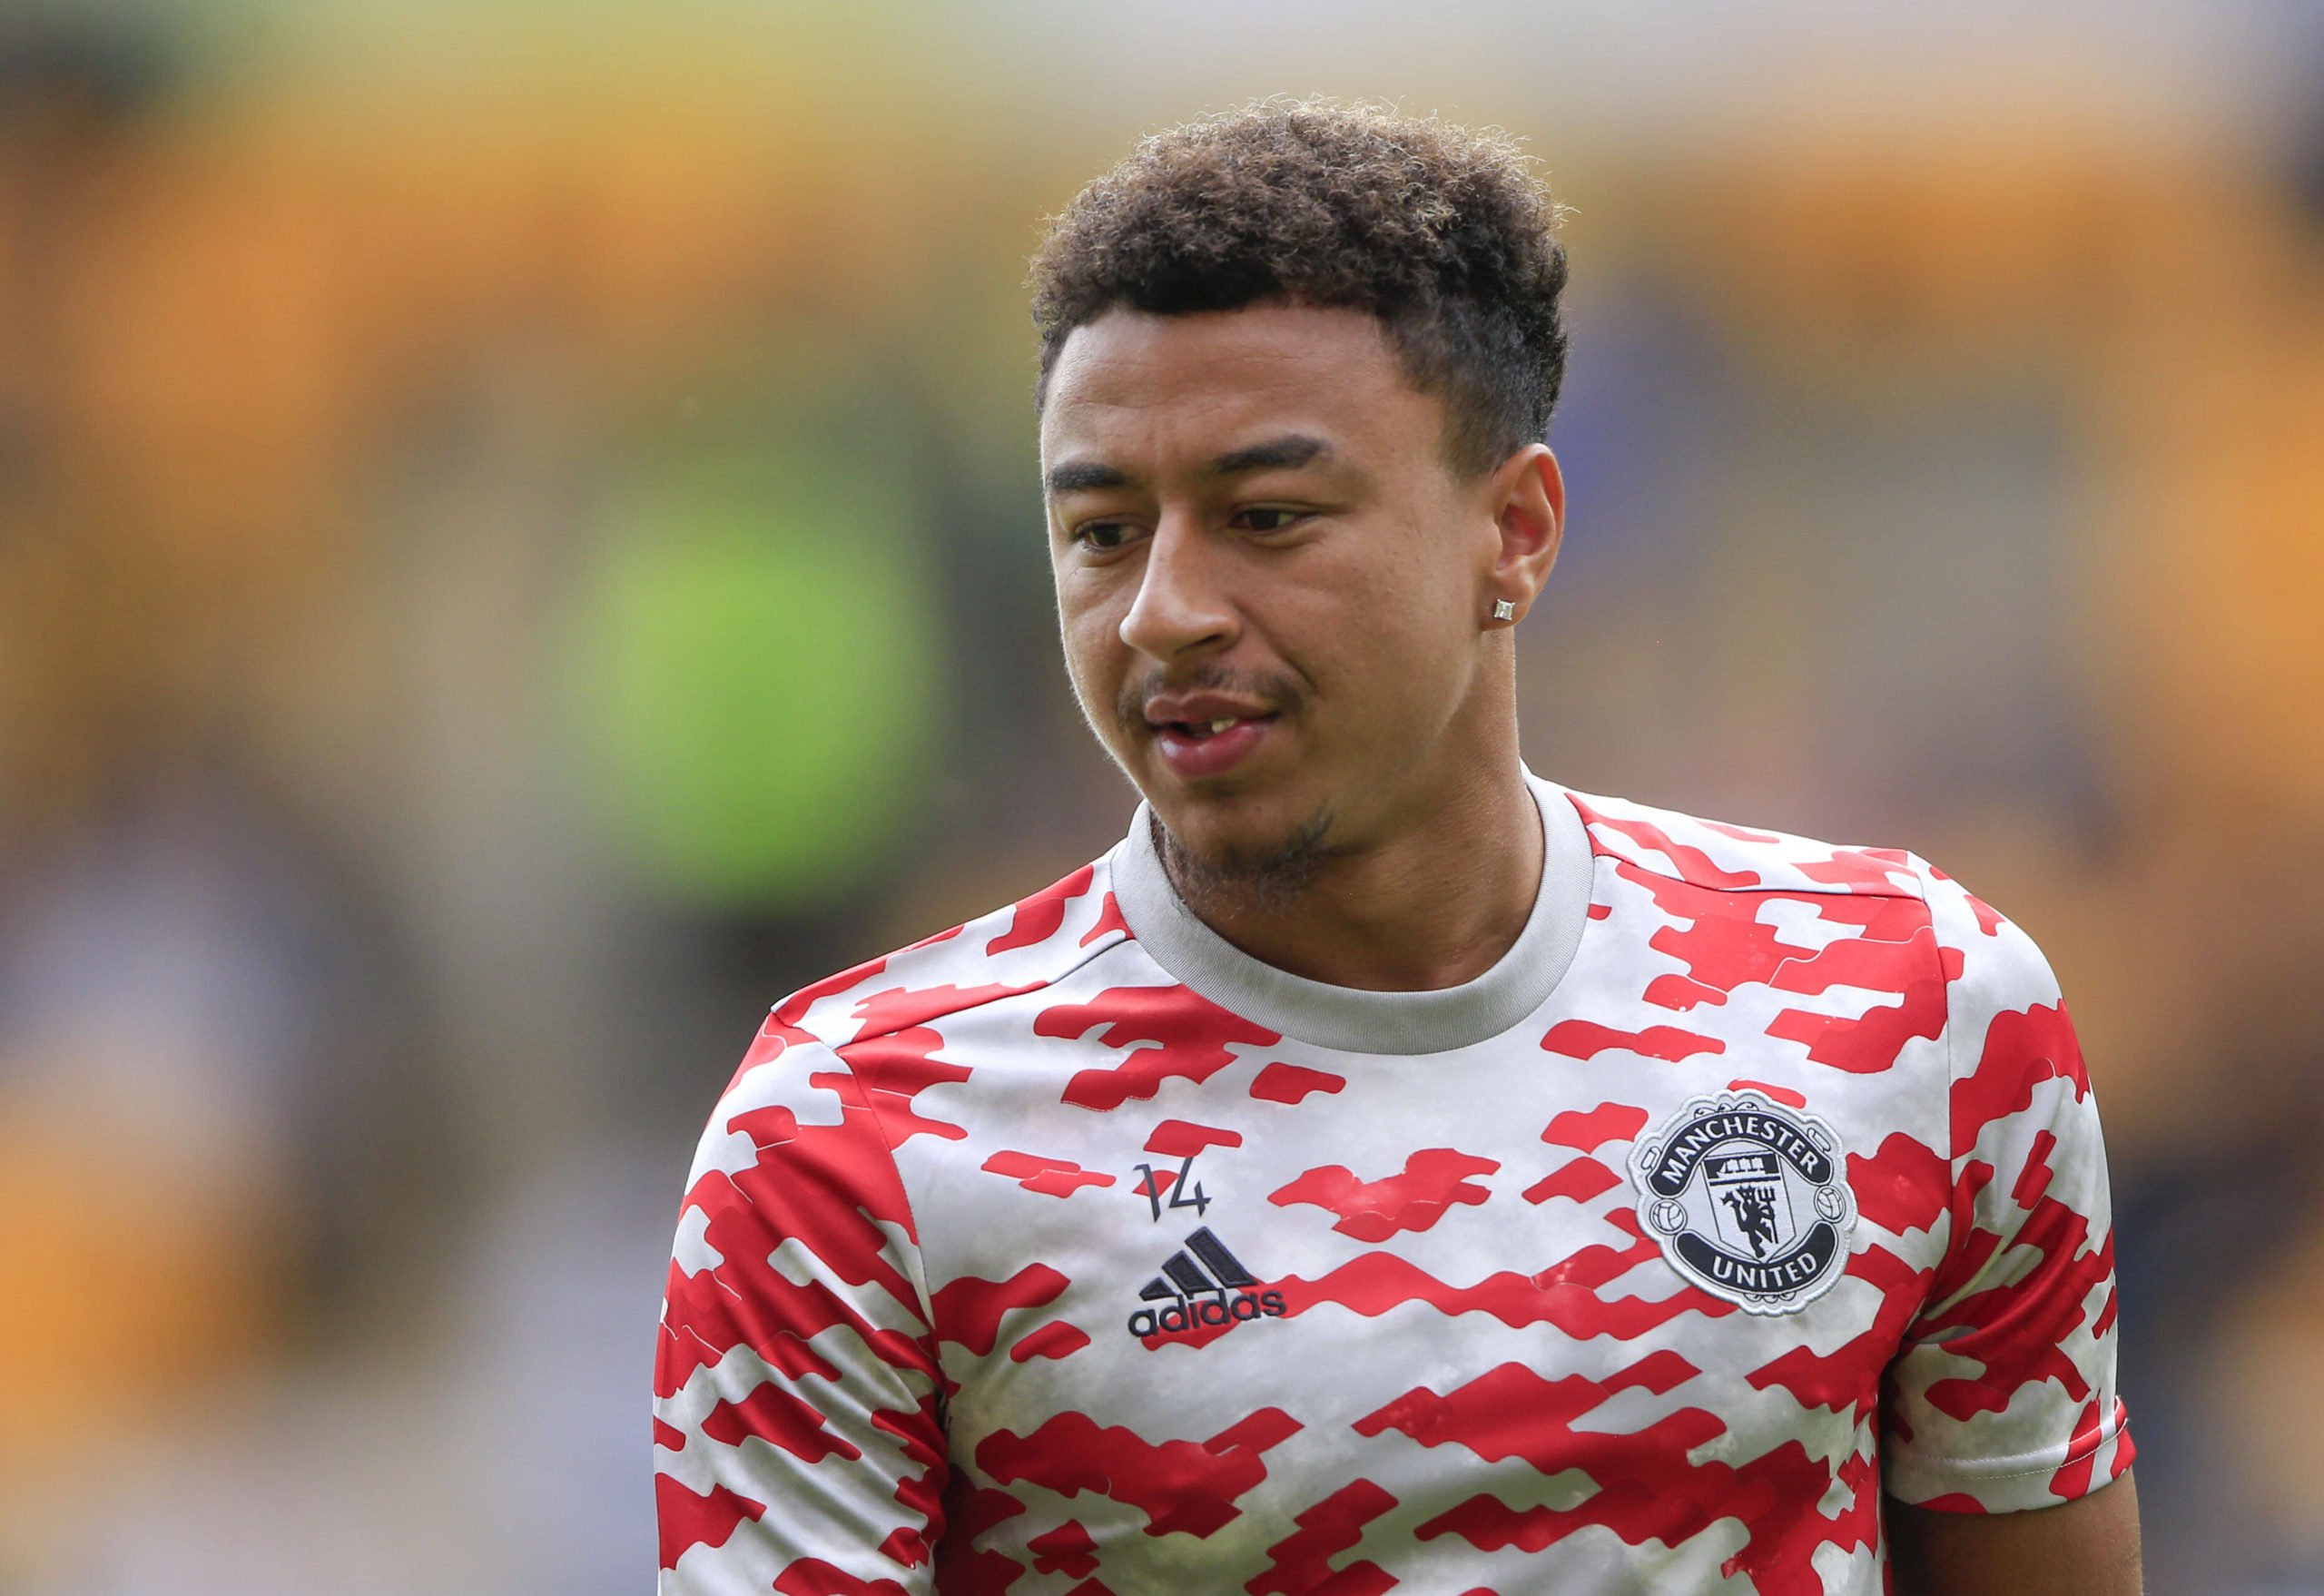 Phillips expects West Ham to face competition for Lingard who is seen in the picture